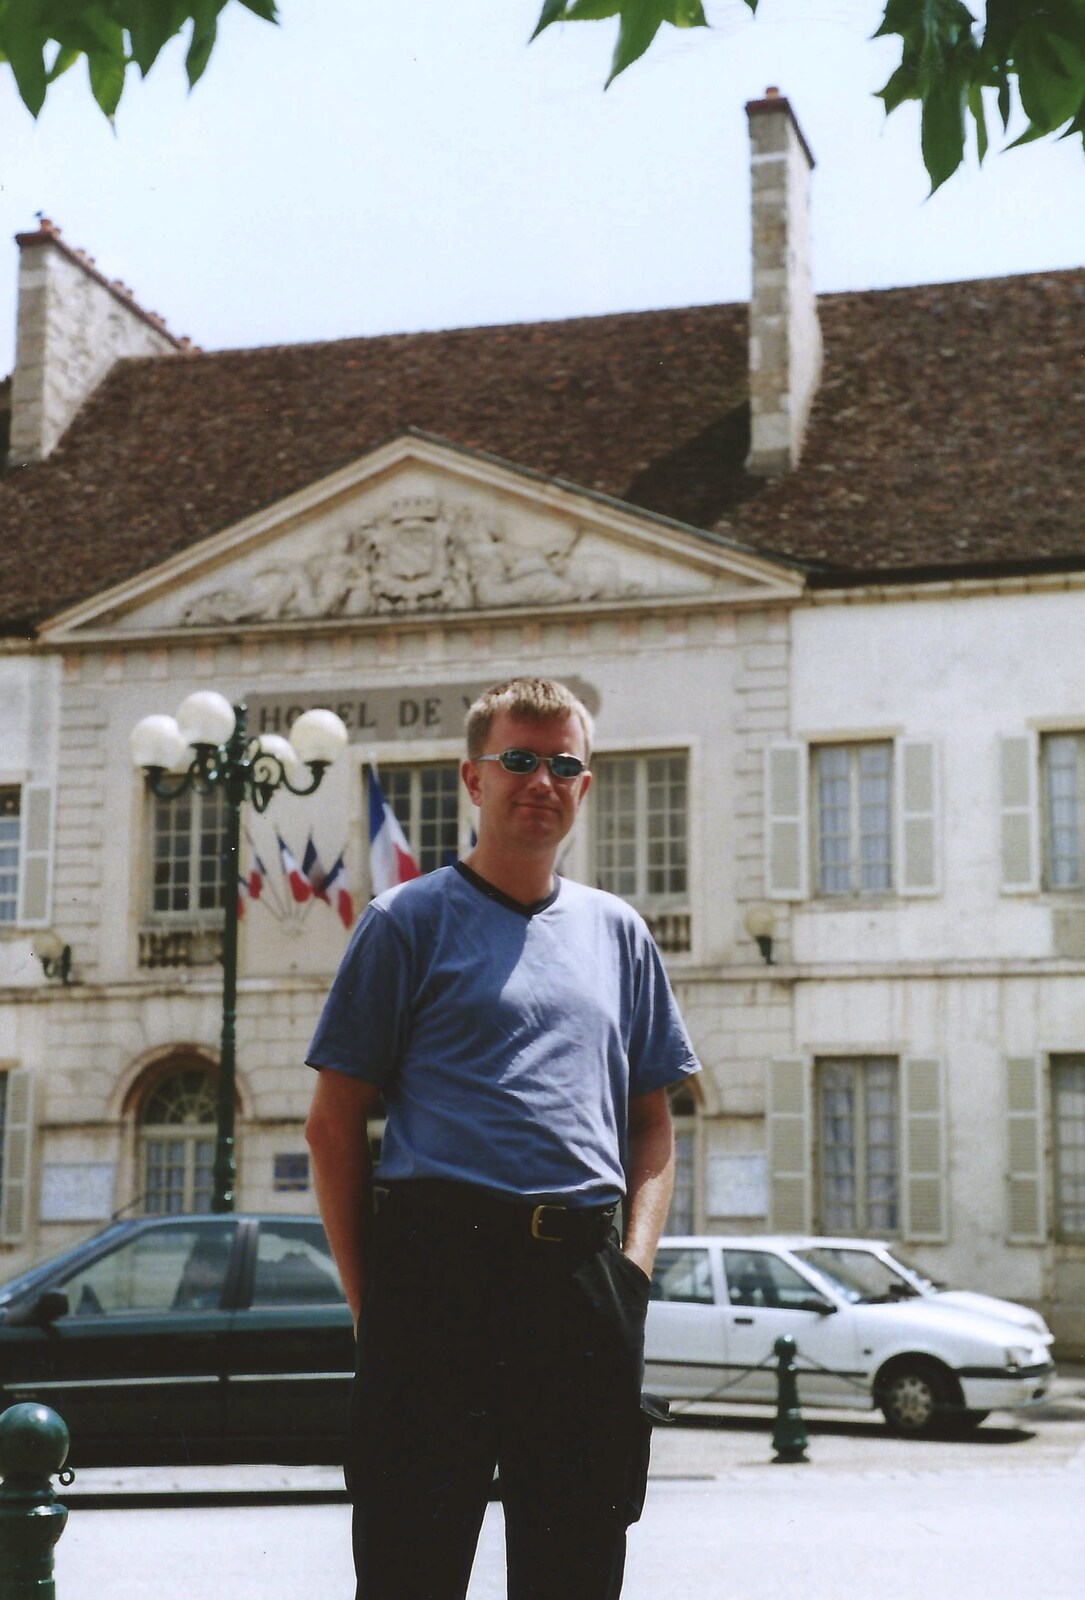 Nosher outside the town hall from A Short Holiday in Chivres, Burgundy, France - 21st July 2001